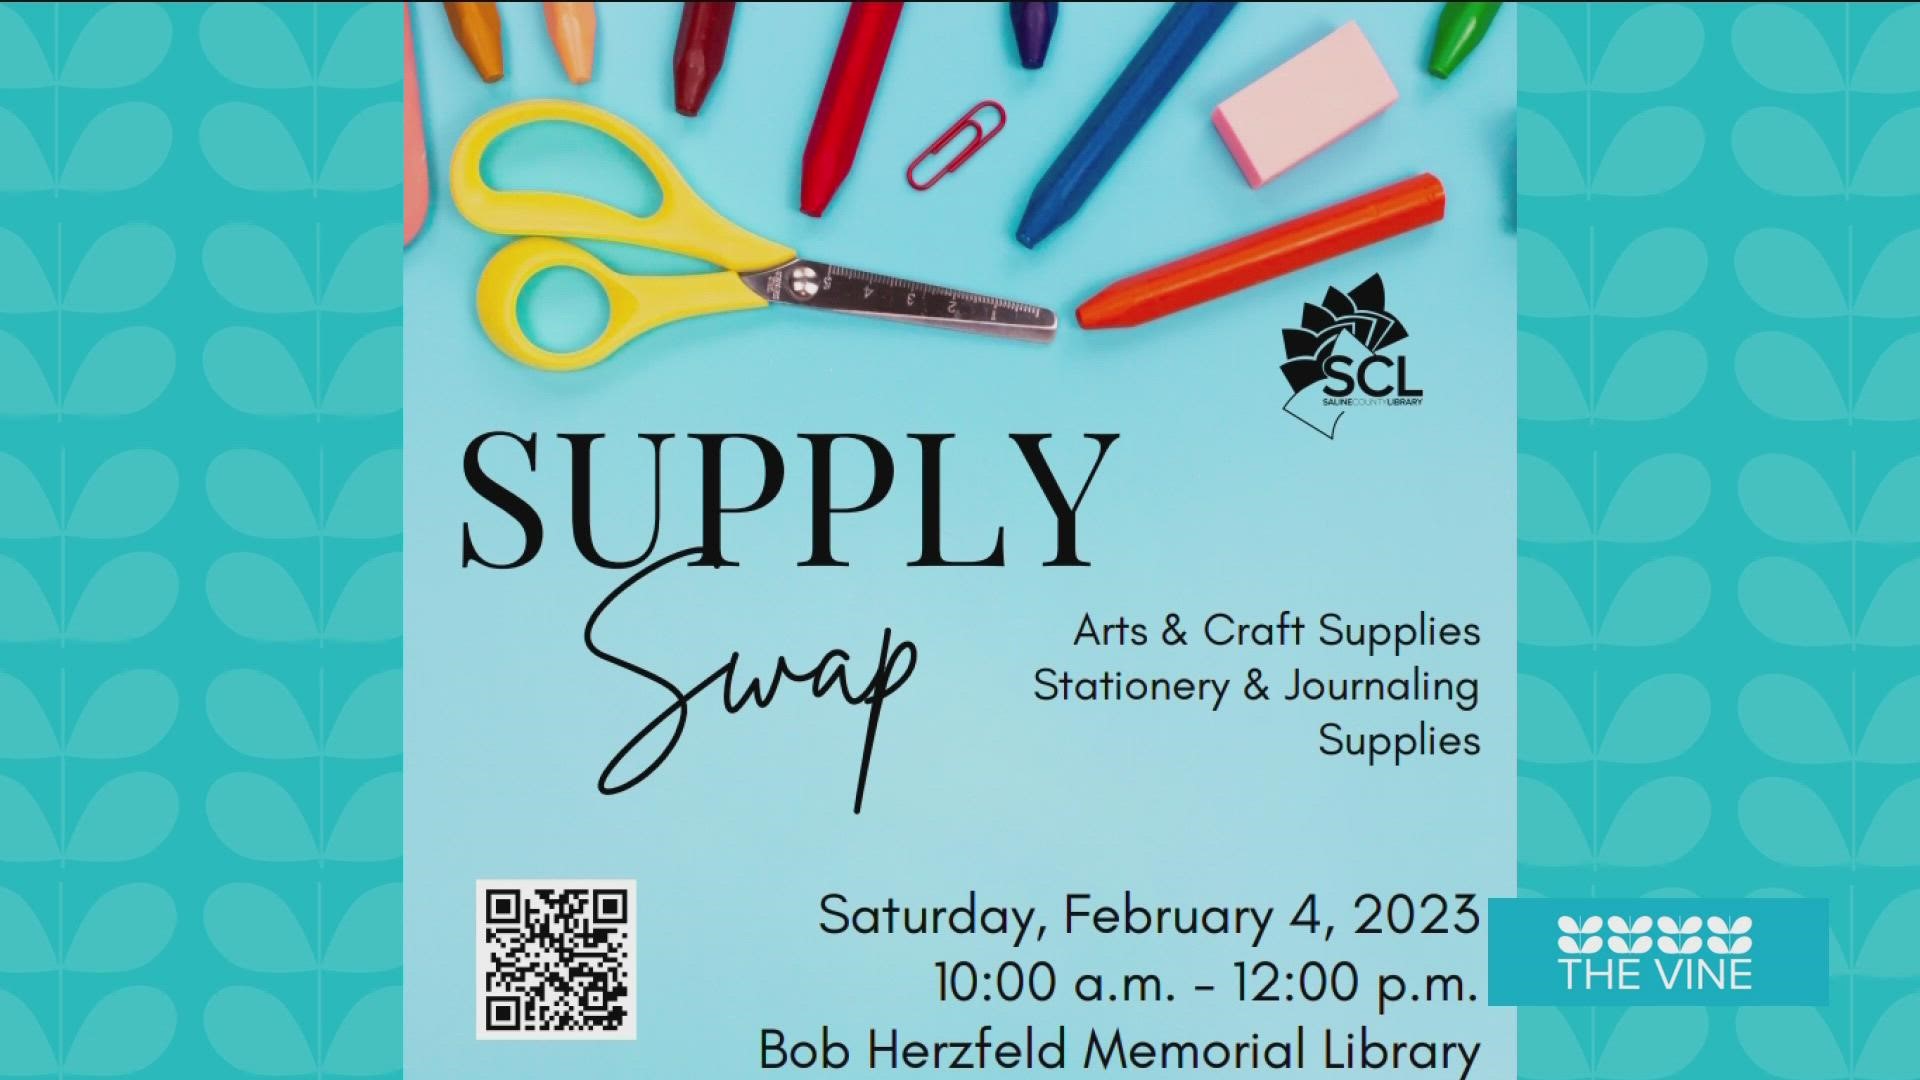 Get ready to go through your crafting supplies, the Saline County Library is hosting a supply swap in February.